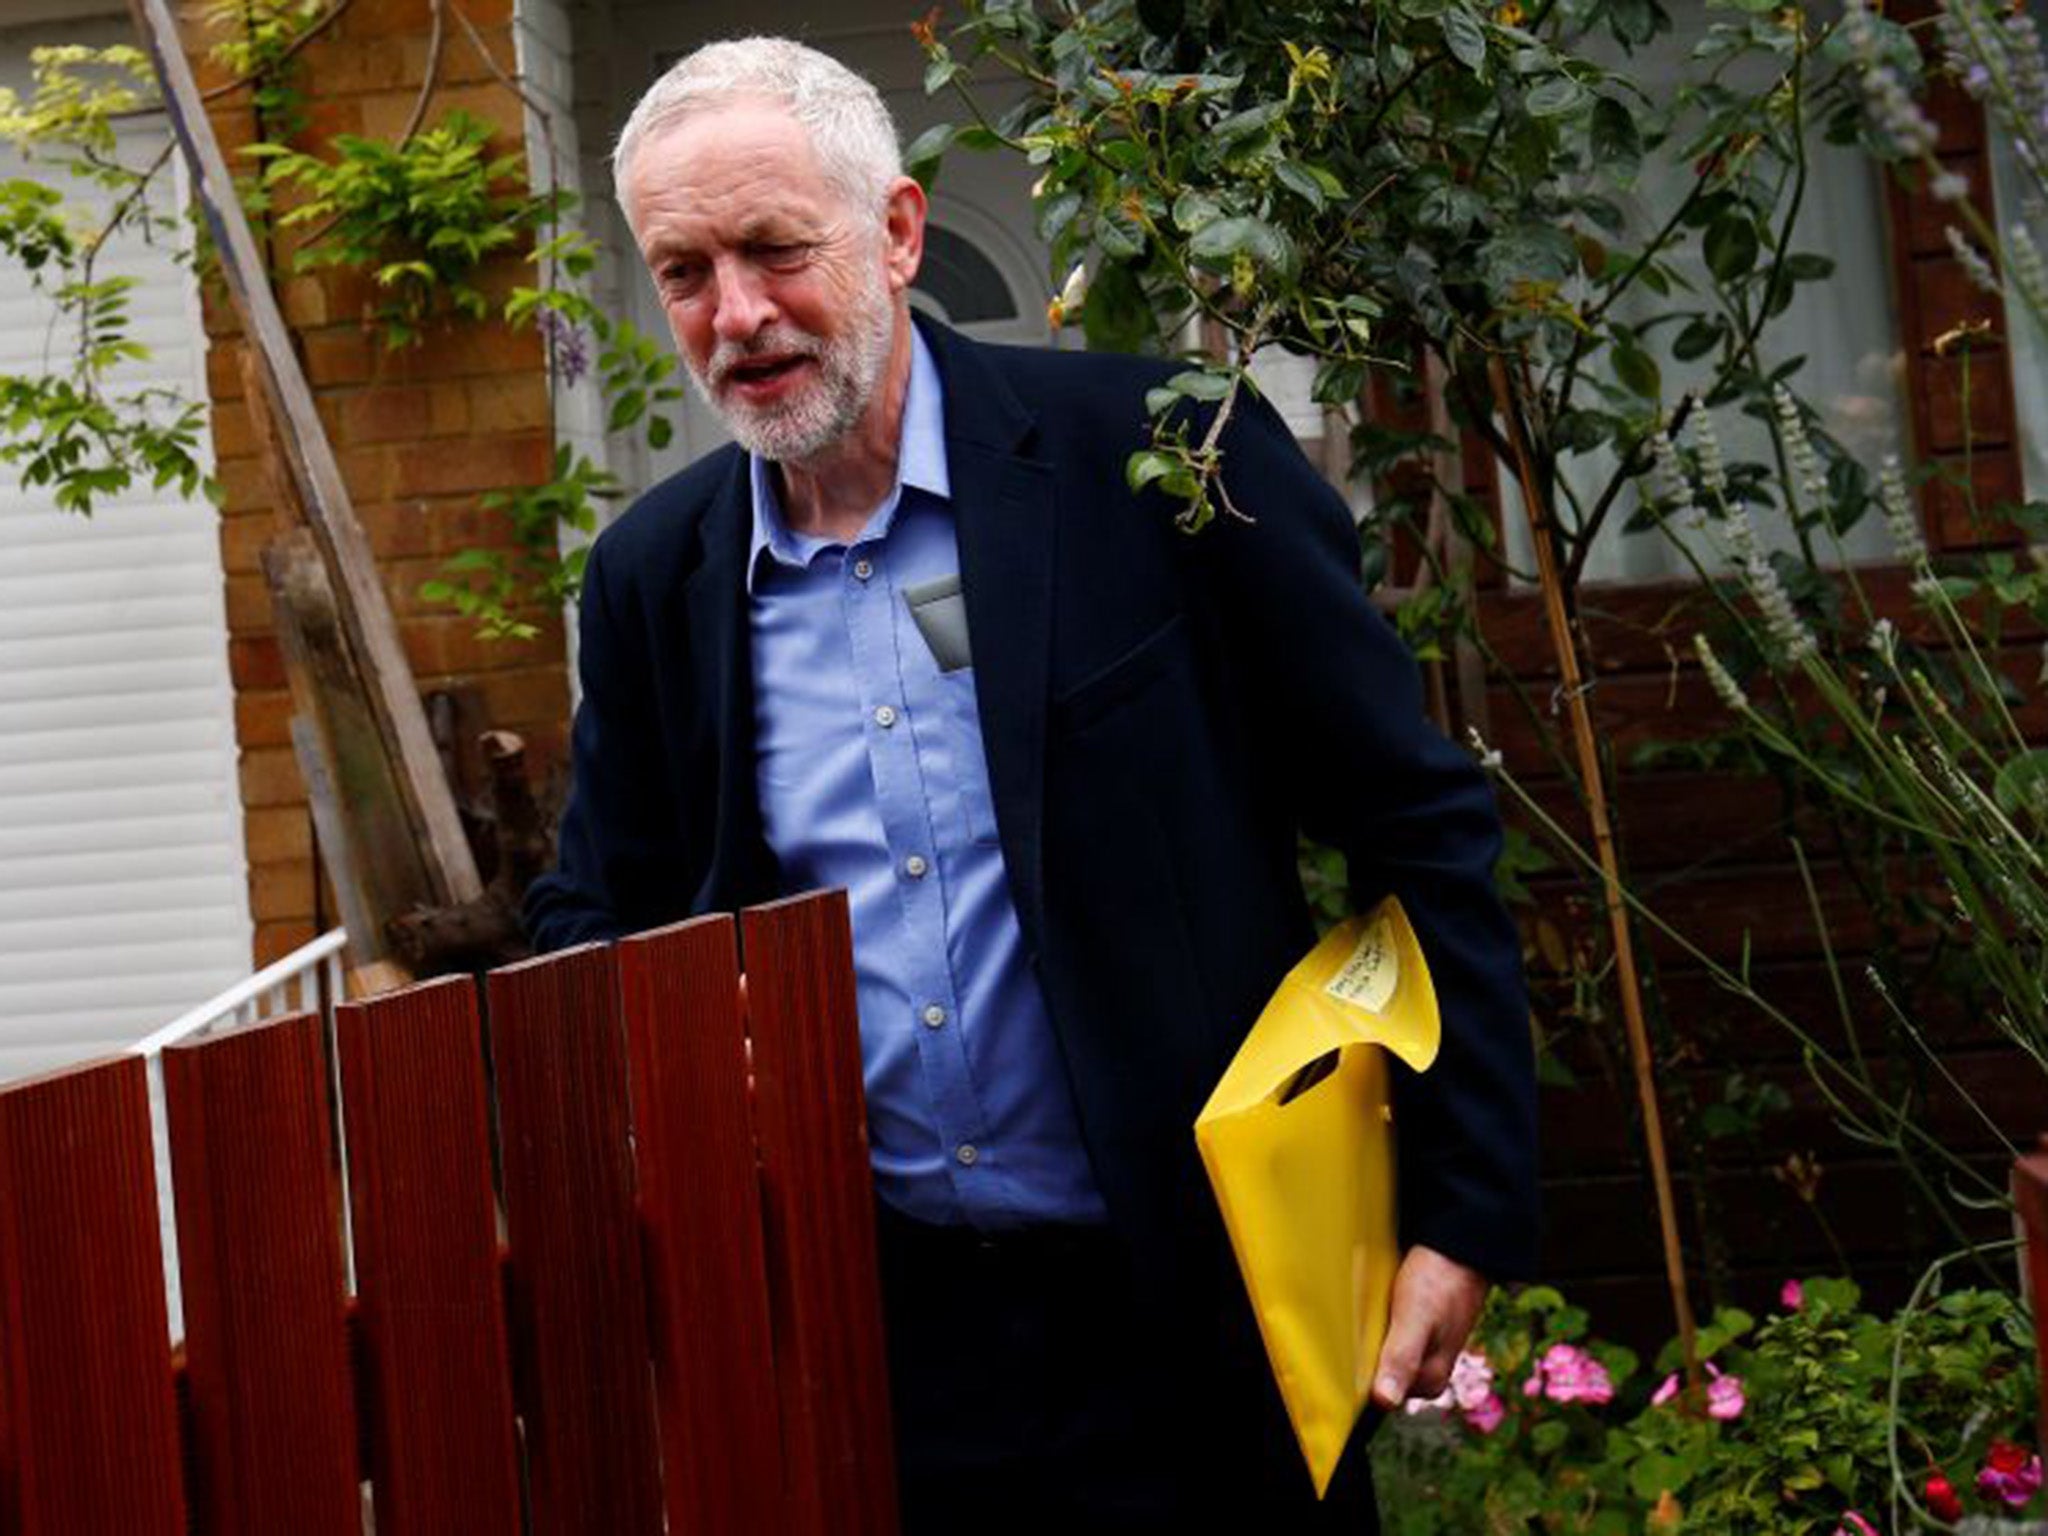 Mr Corbyn said he had been sent threats this week and previously